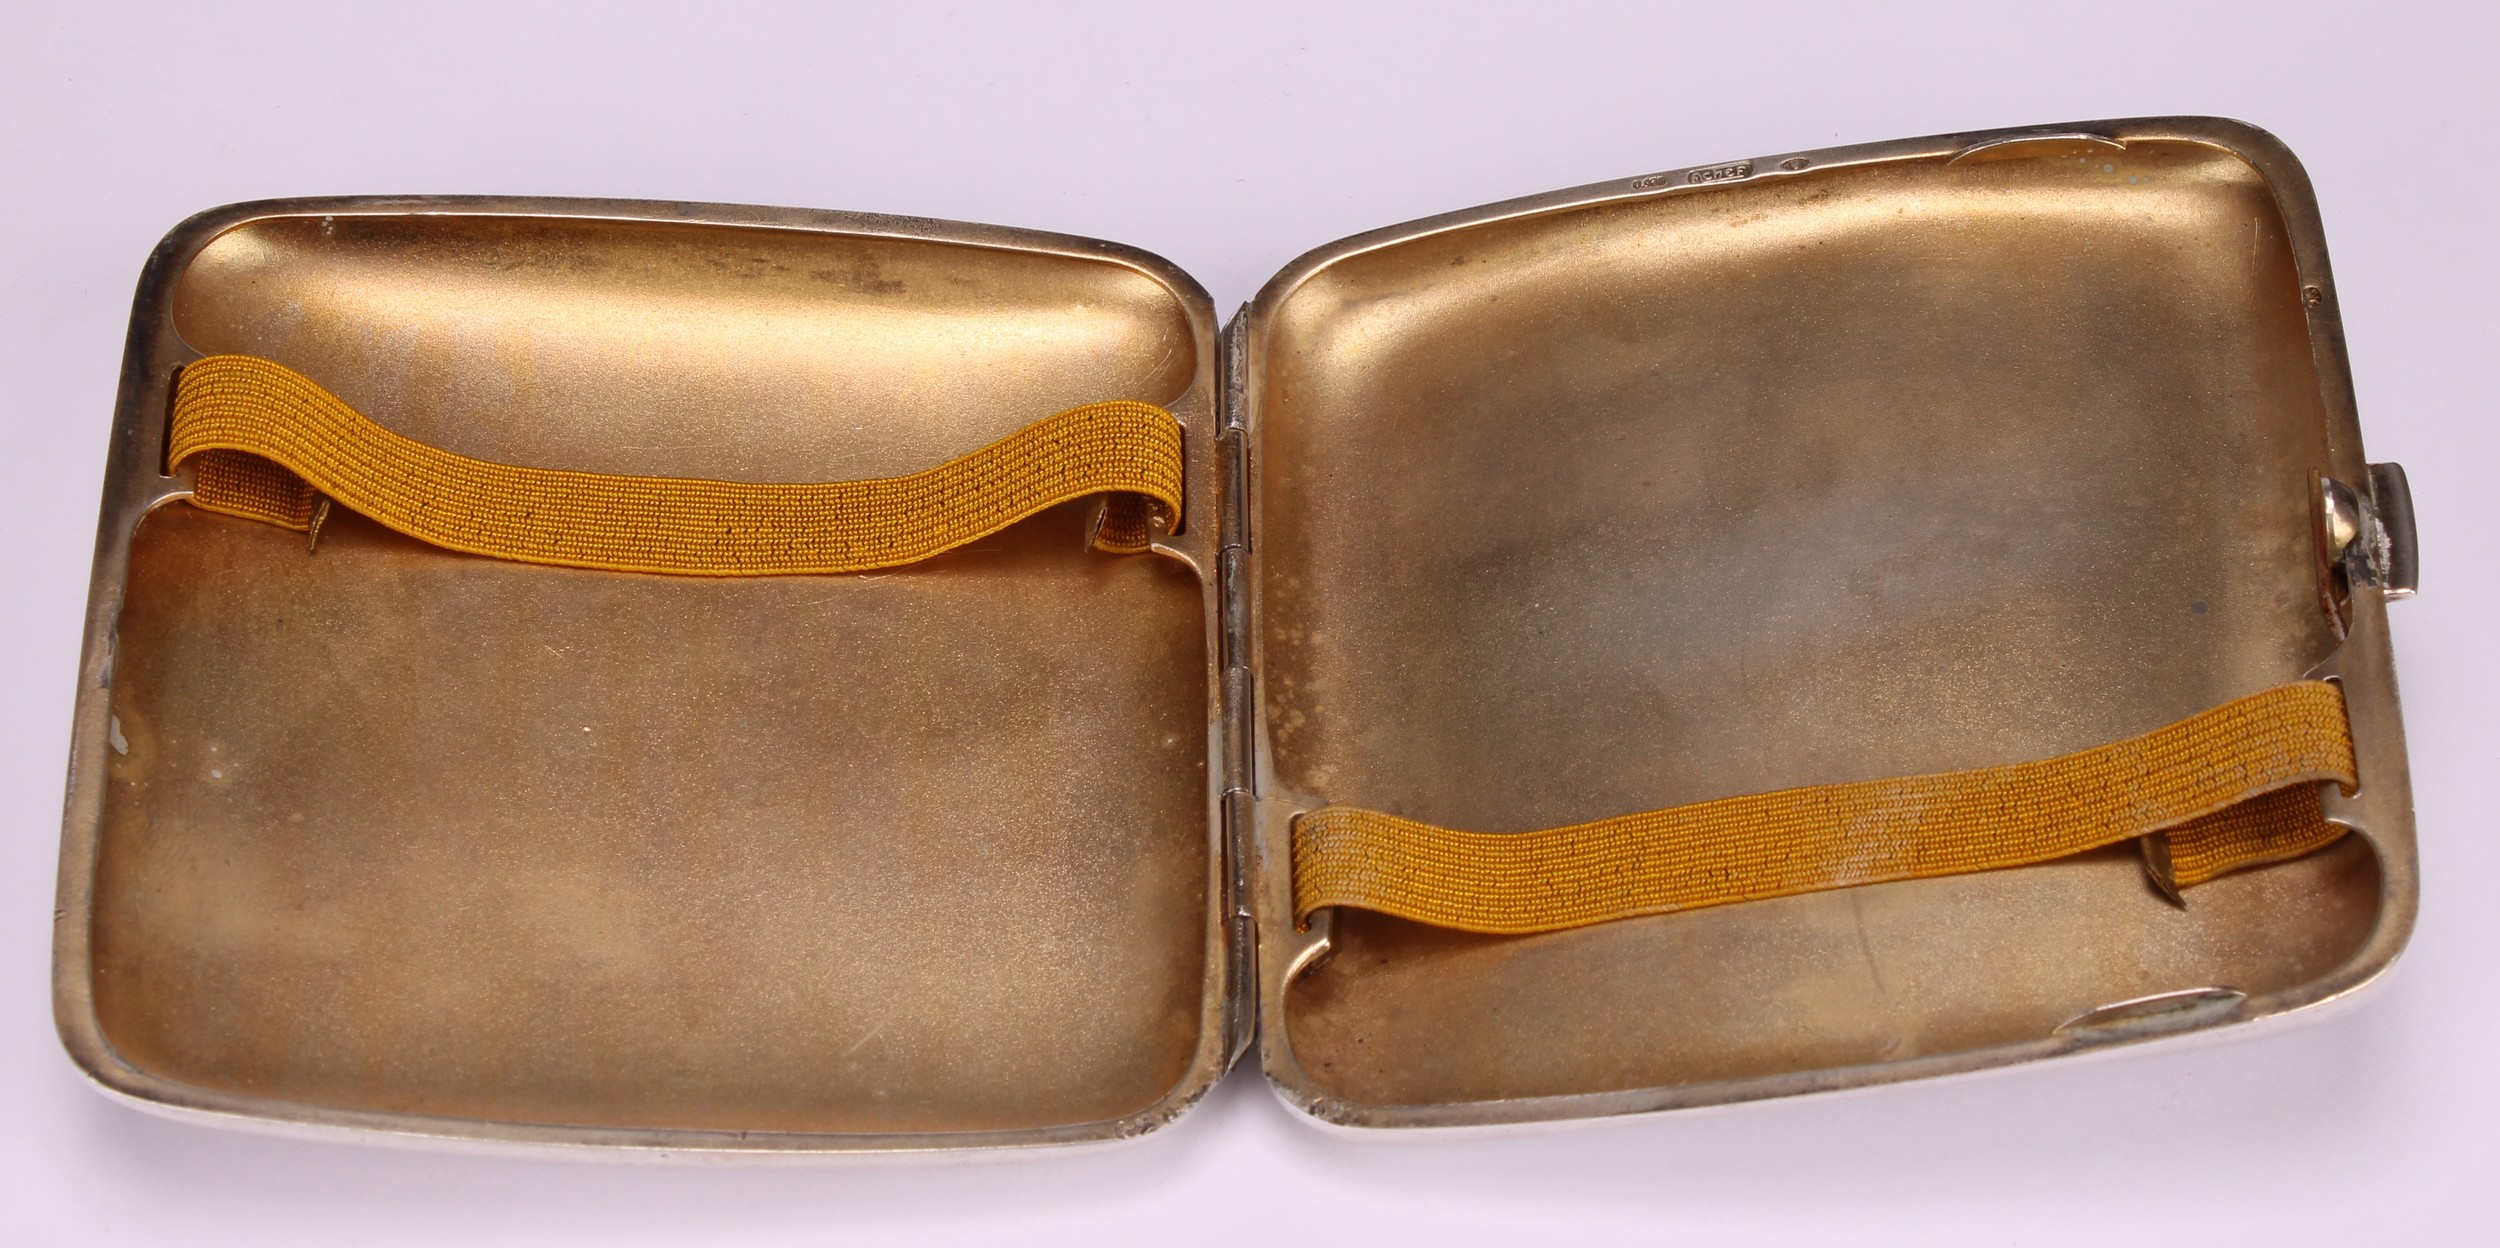 An early 20th century silver and enamel curved rounded rectangular cigarette case, hinged cover with - Image 4 of 5